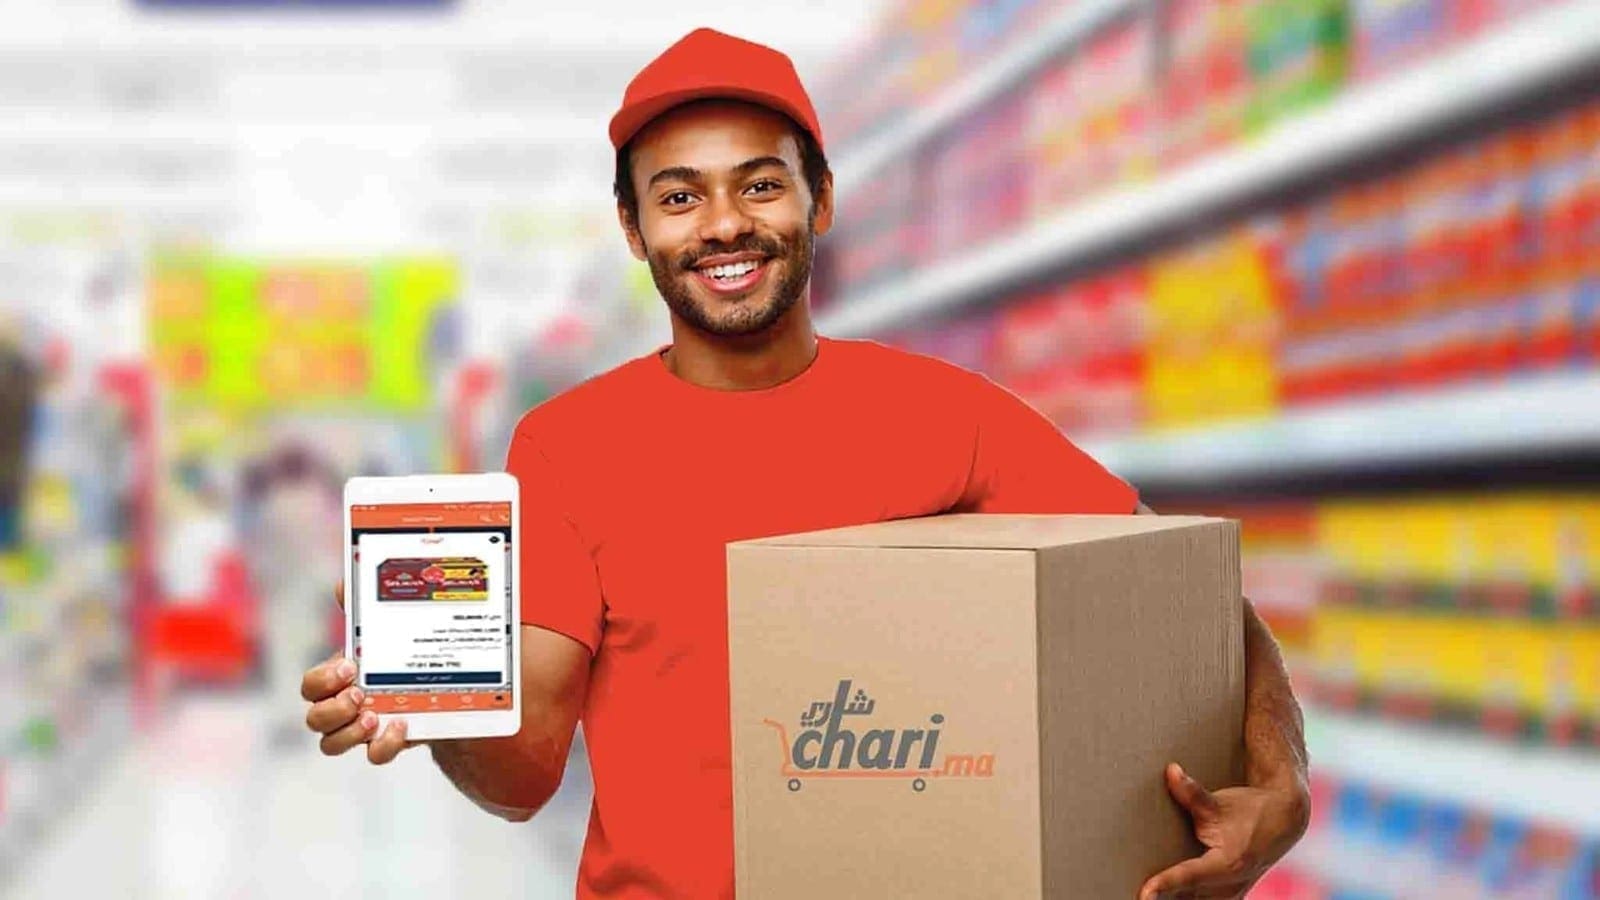 Moroccan B2B e-commerce startup Chari.ma planning expansion after strong growth in Casablanca